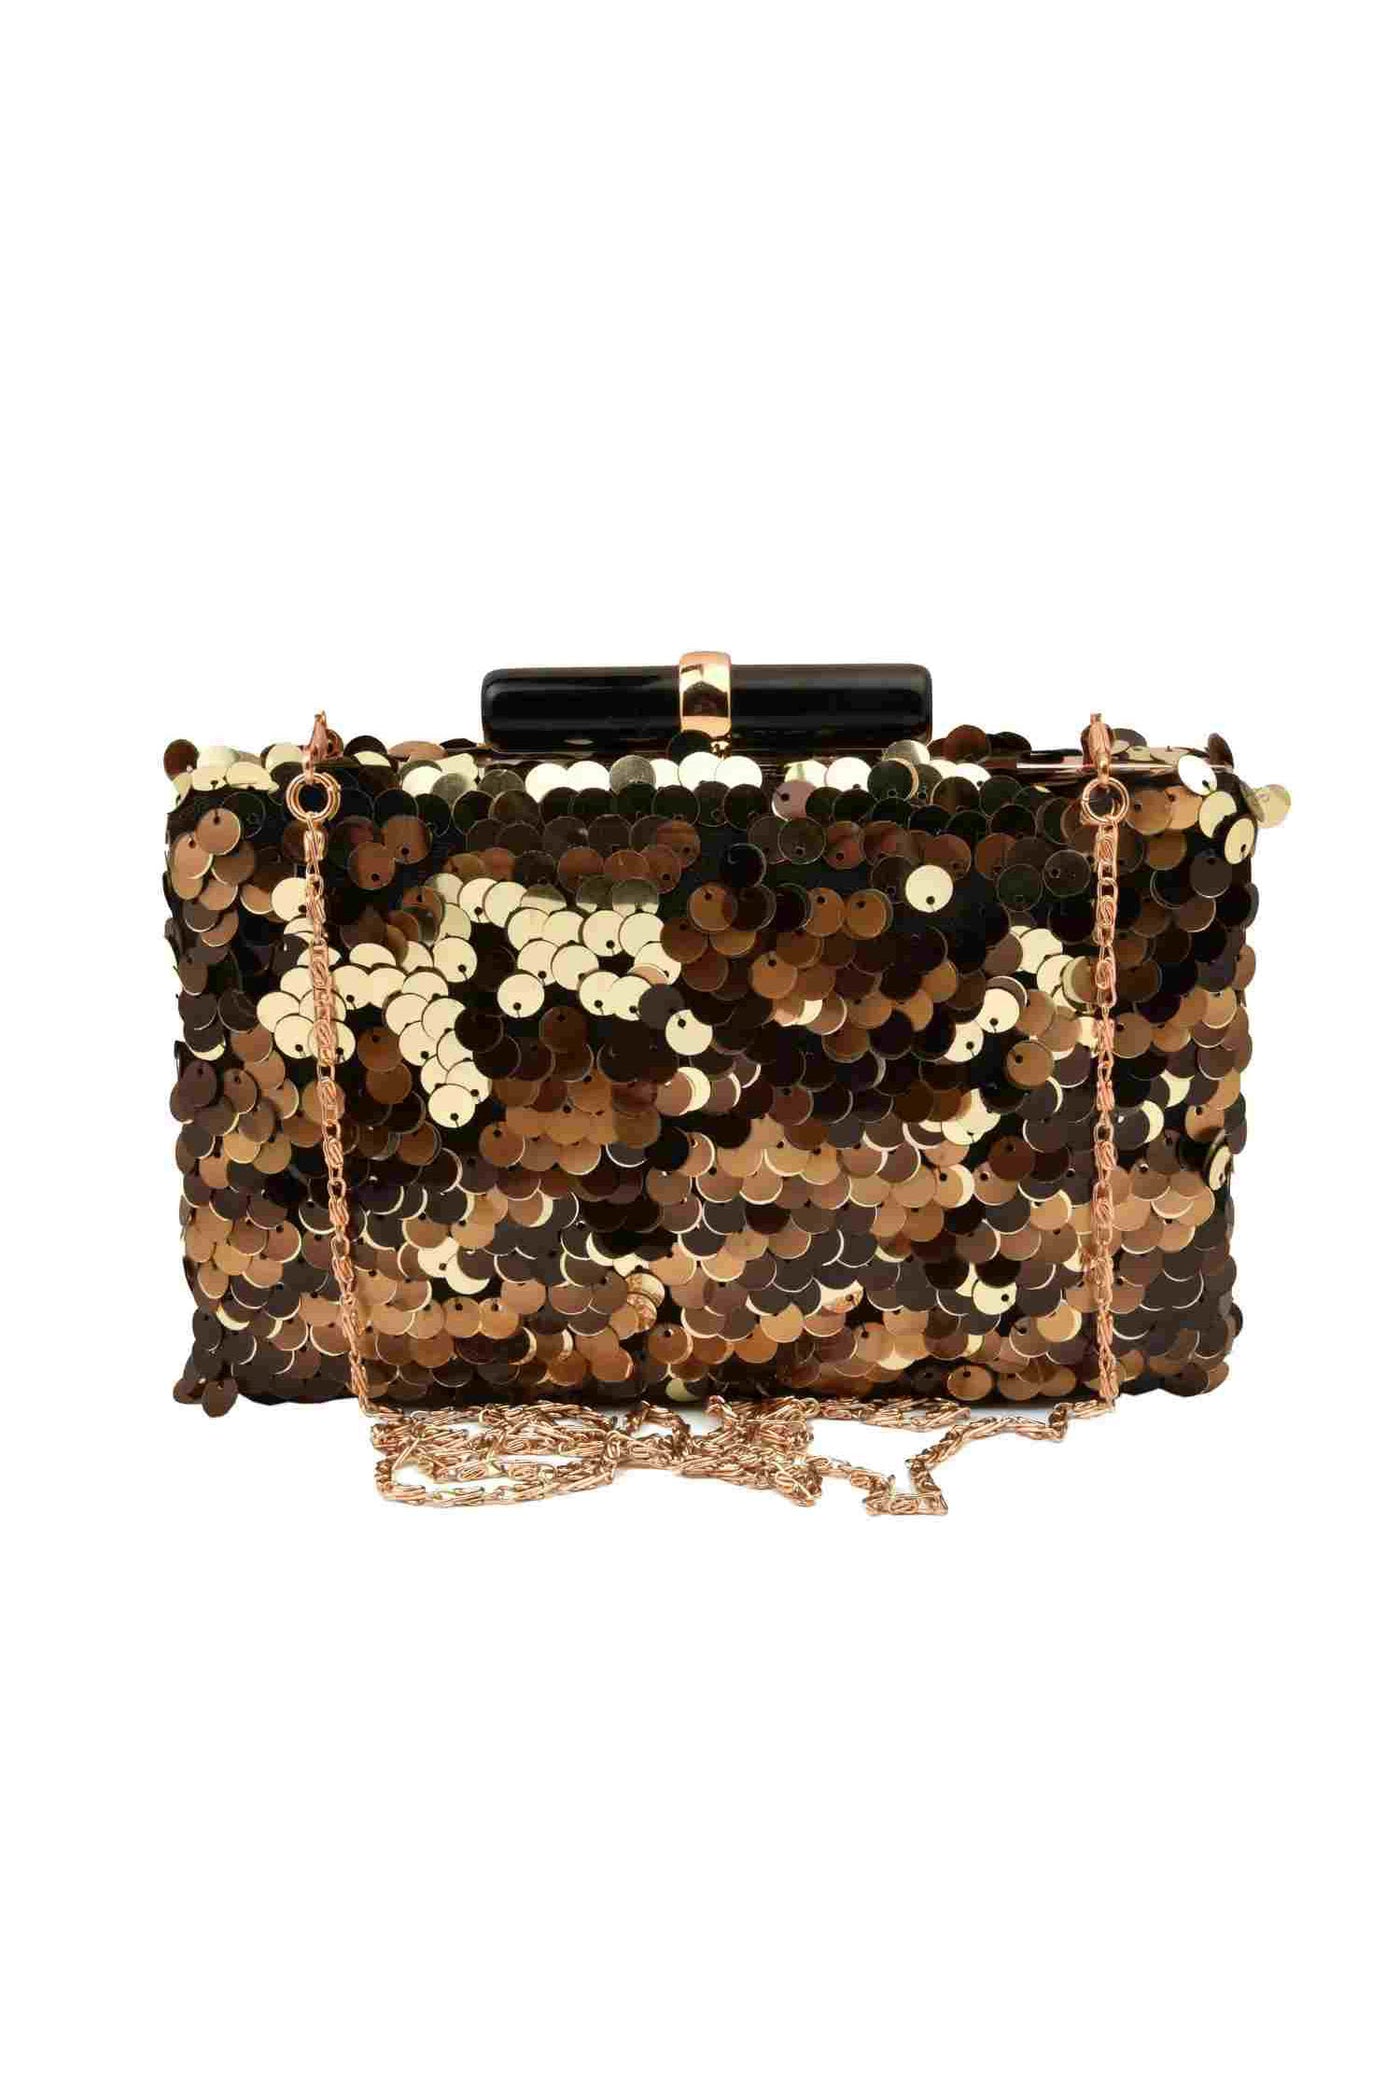 Black,Brown and Gold Sequins Party Clutch